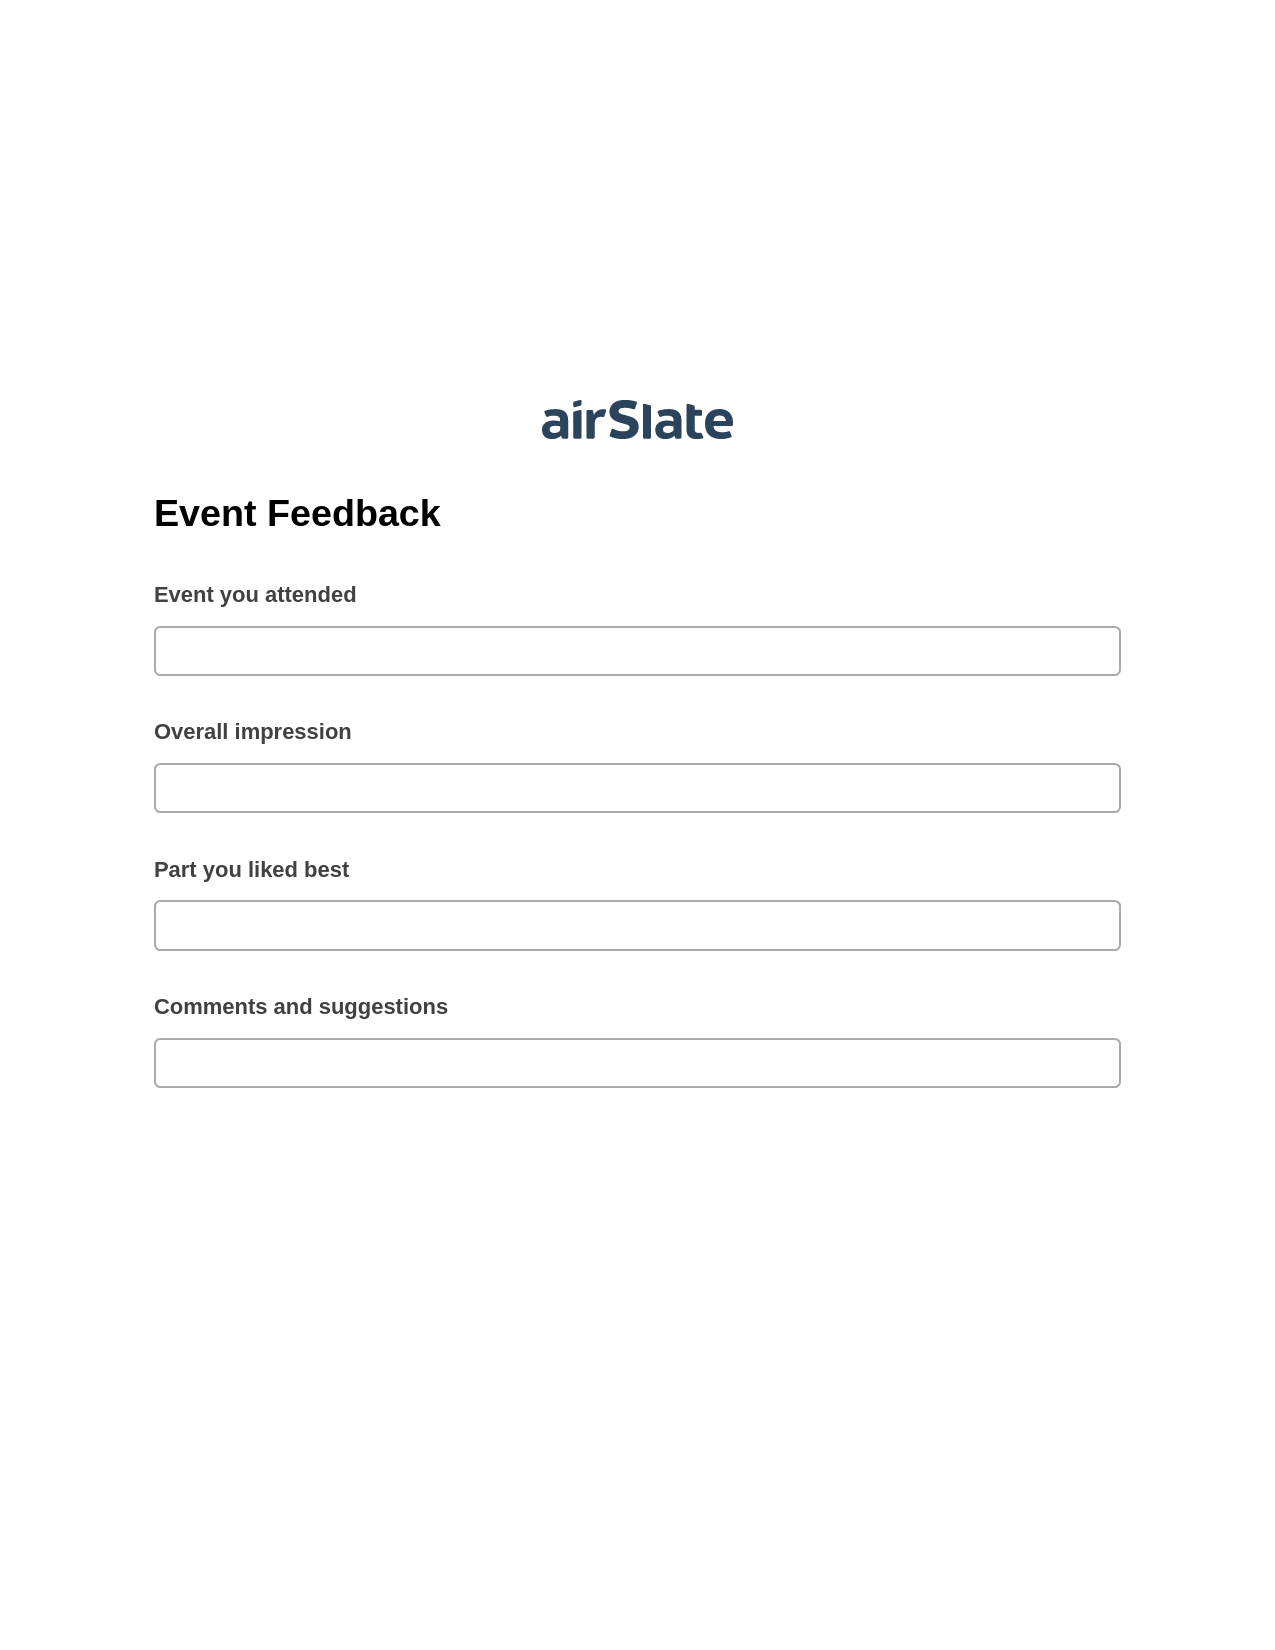 Event Feedback Pre-fill from another Slate Bot, Create Salesforce Record Bot, Export to Smartsheet